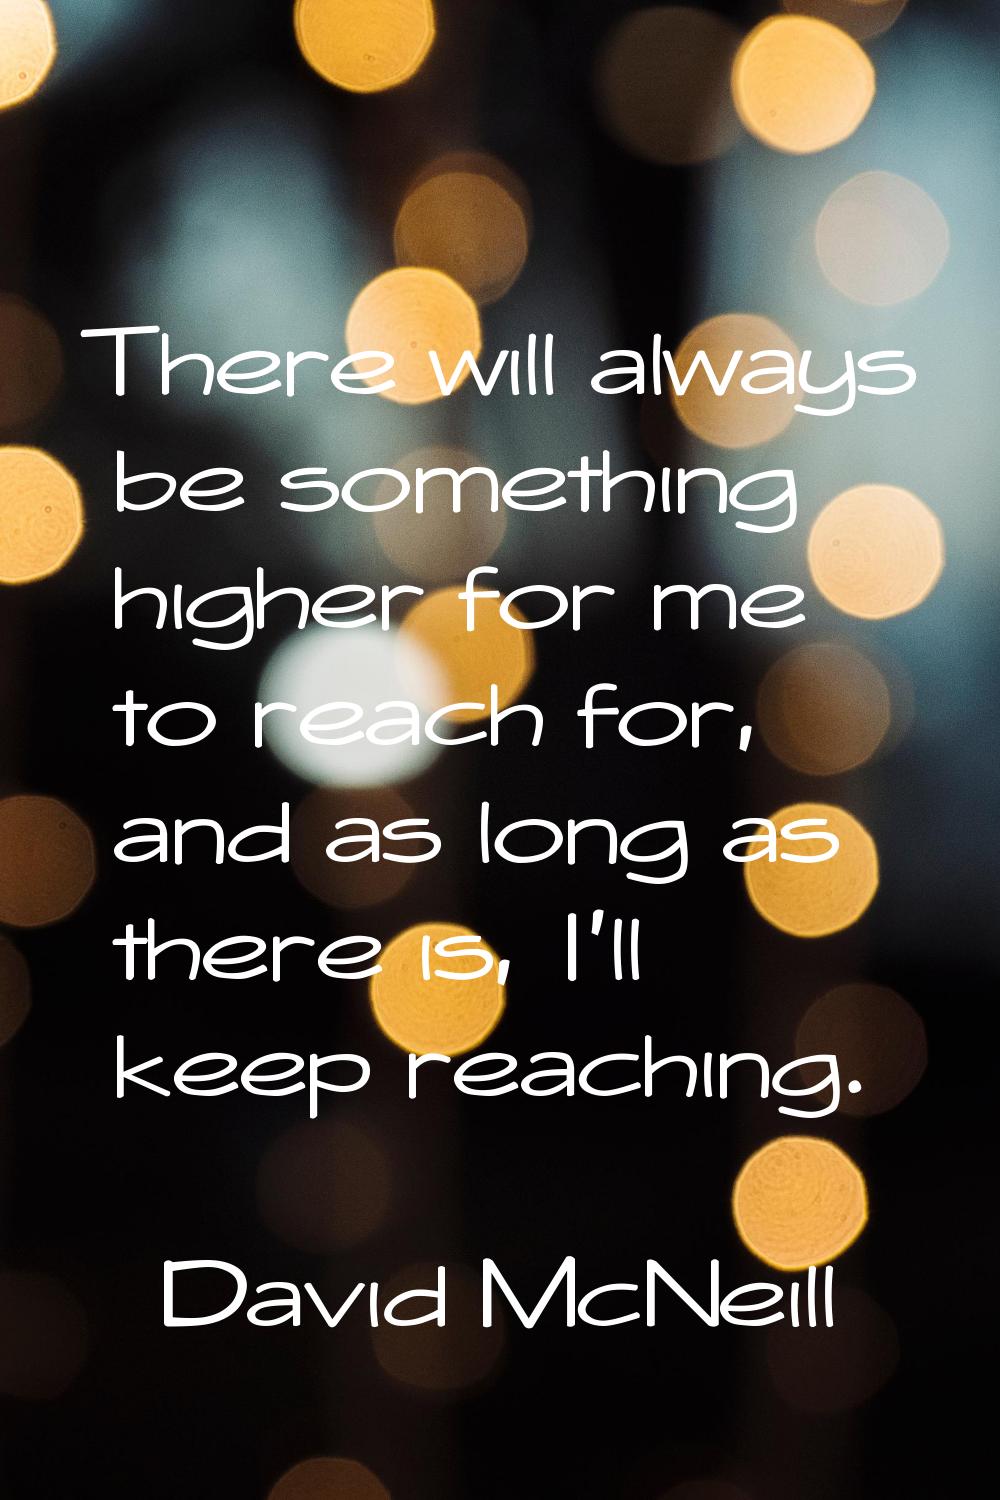 There will always be something higher for me to reach for, and as long as there is, I'll keep reach